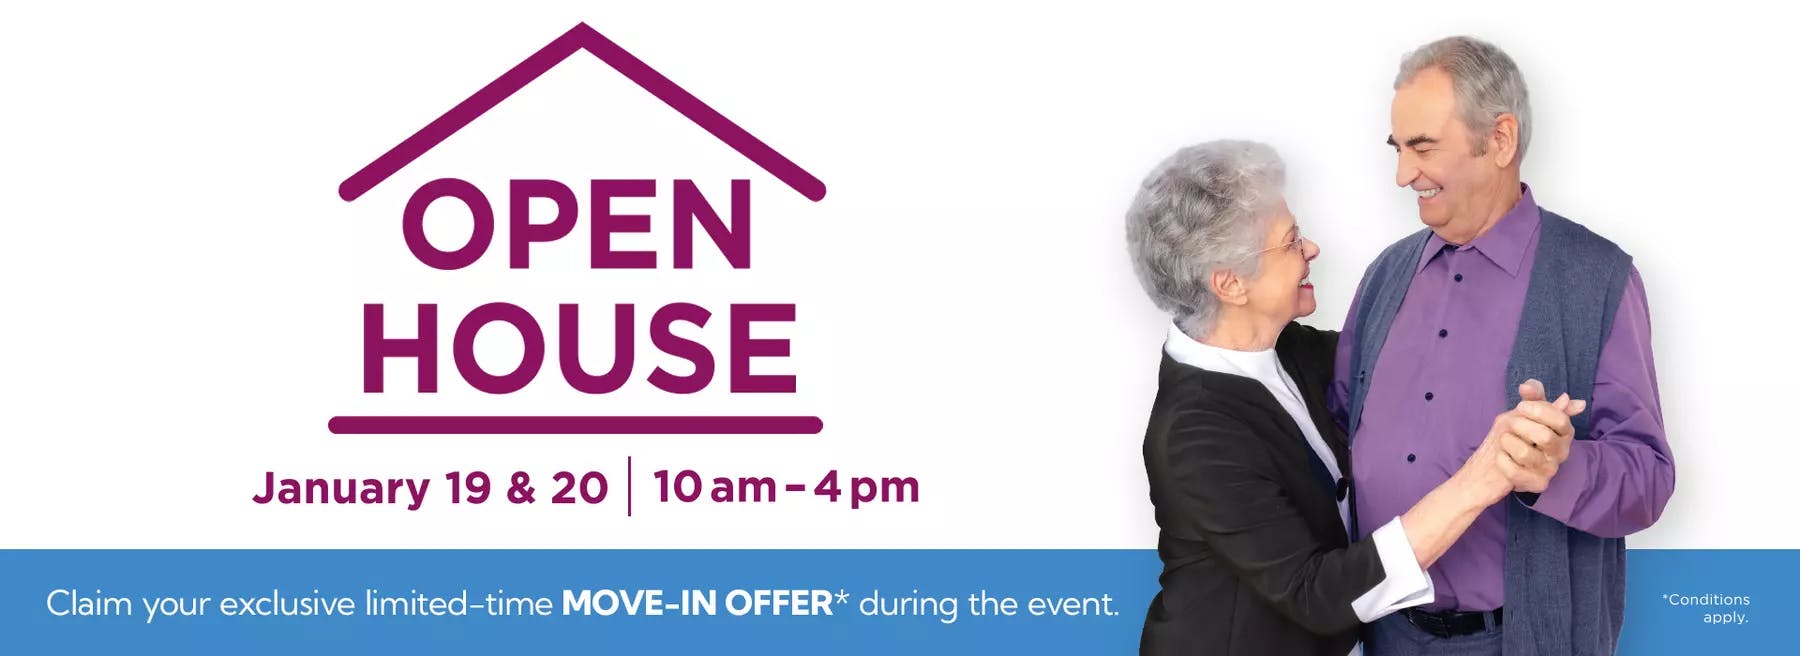 Open house. January 19 and 20th. 10 am to 4 pm. Claim your exclusive limited-time Move-in offer during the event. Conditions apply